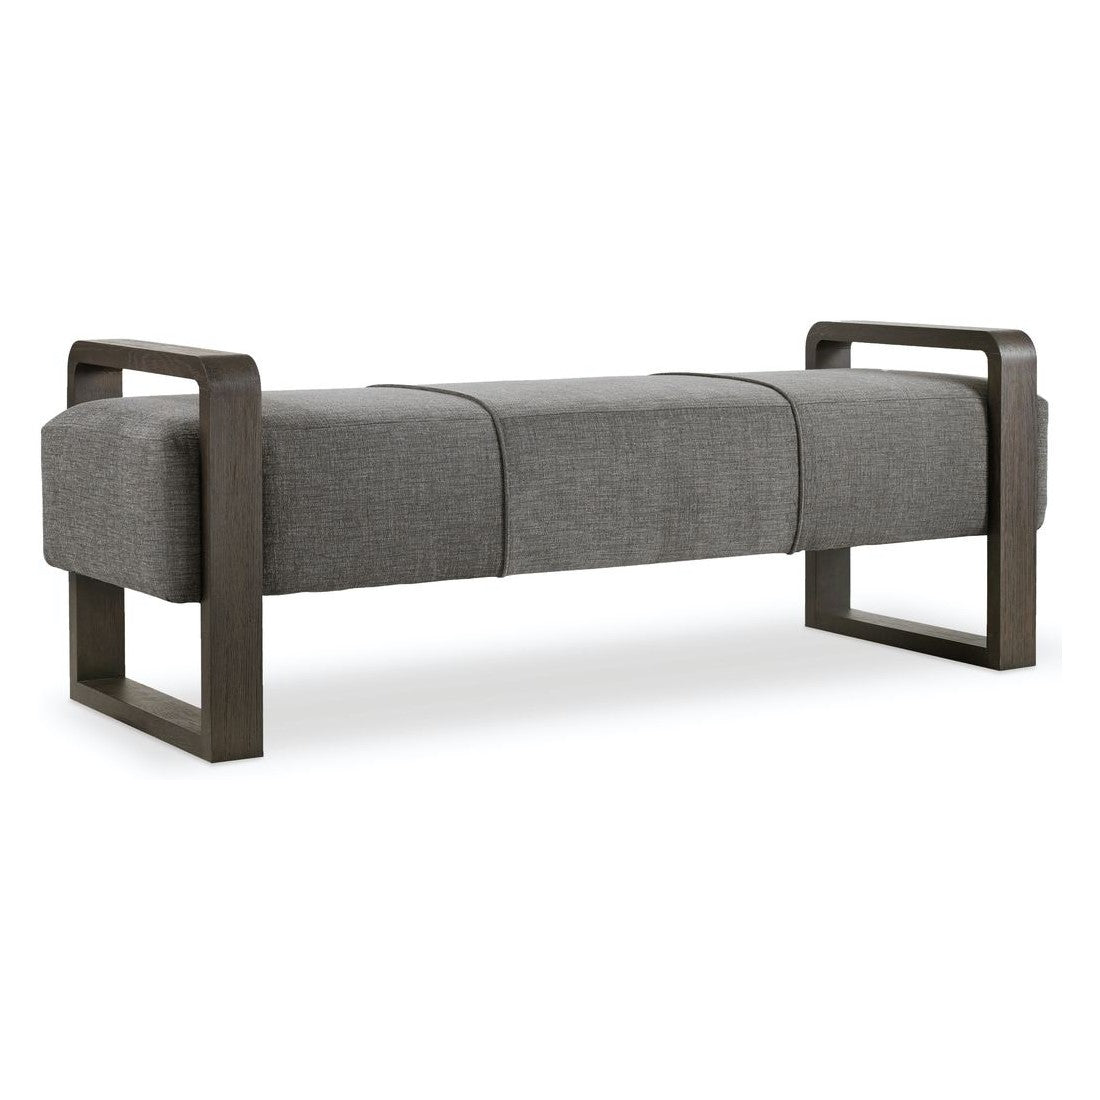 Curata Upholstered Bench